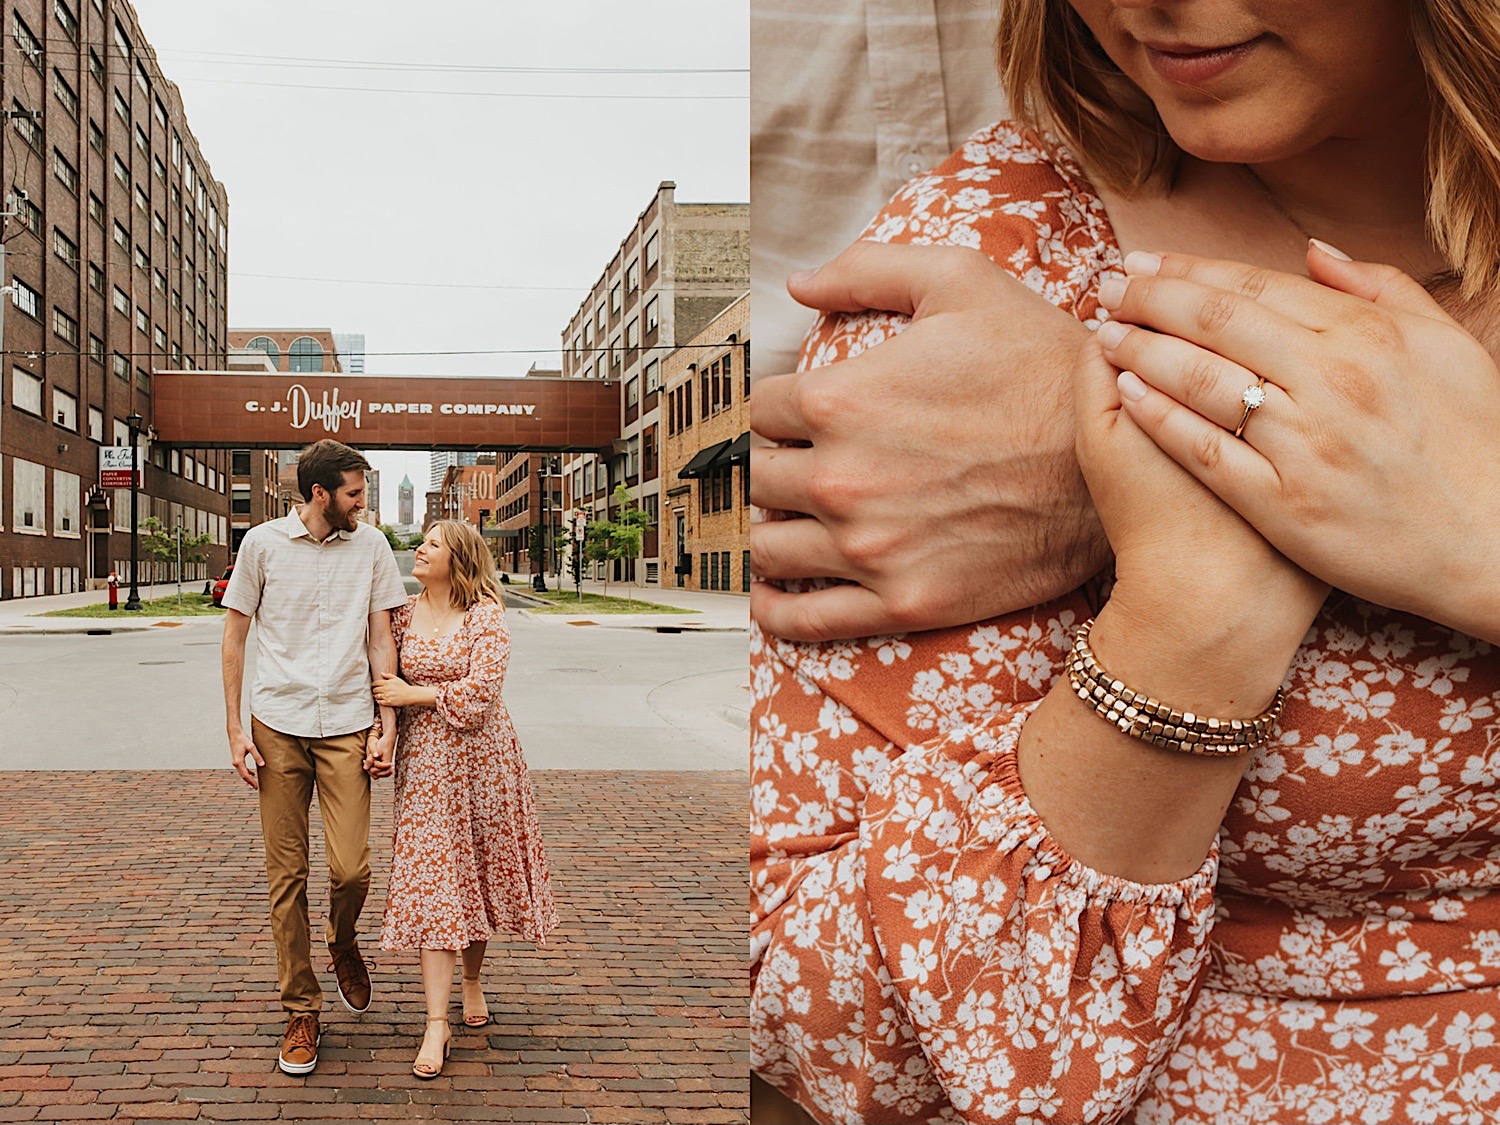 2 photos side by side, the left is of a couple smiling at one another while walking towards the camera, the right is a close up of the woman being hugged while showing off her engagement ring